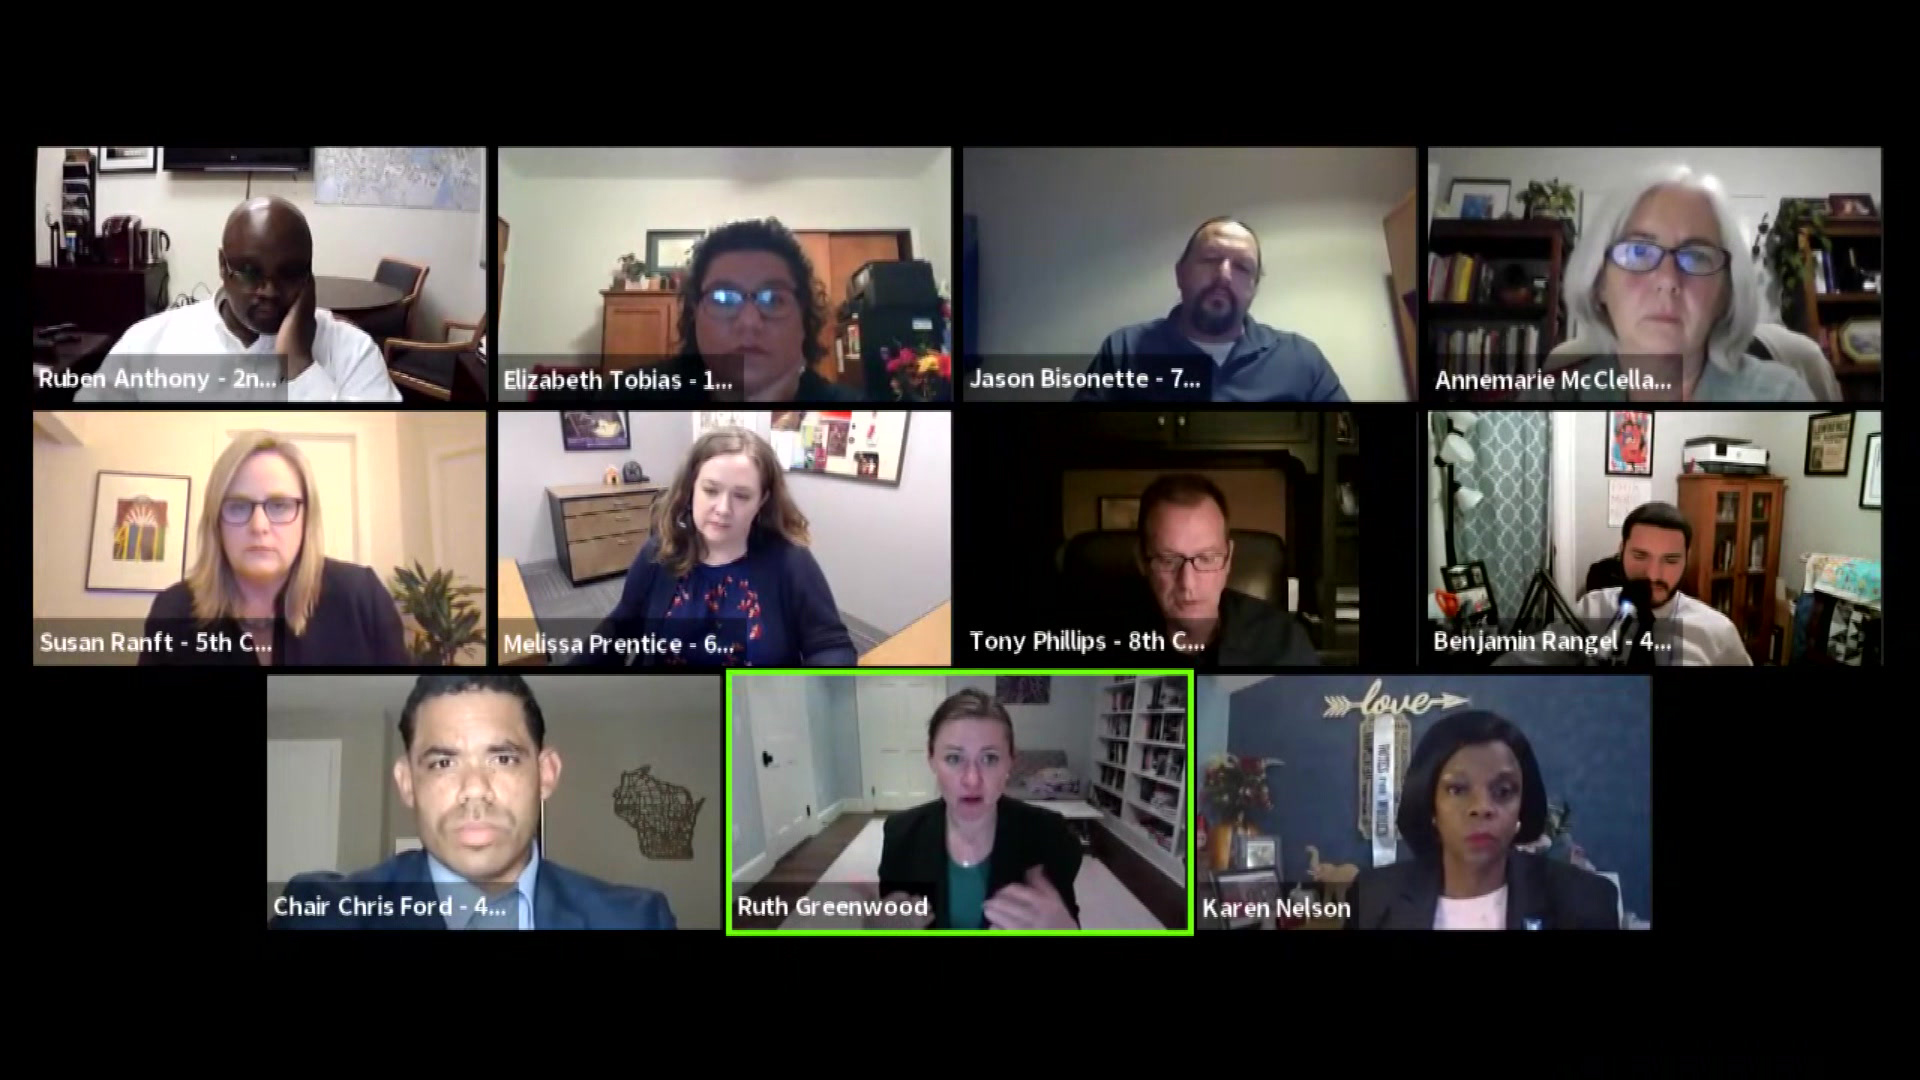 A screenshot shows participants in a virtual meeting of the People's Maps Commission